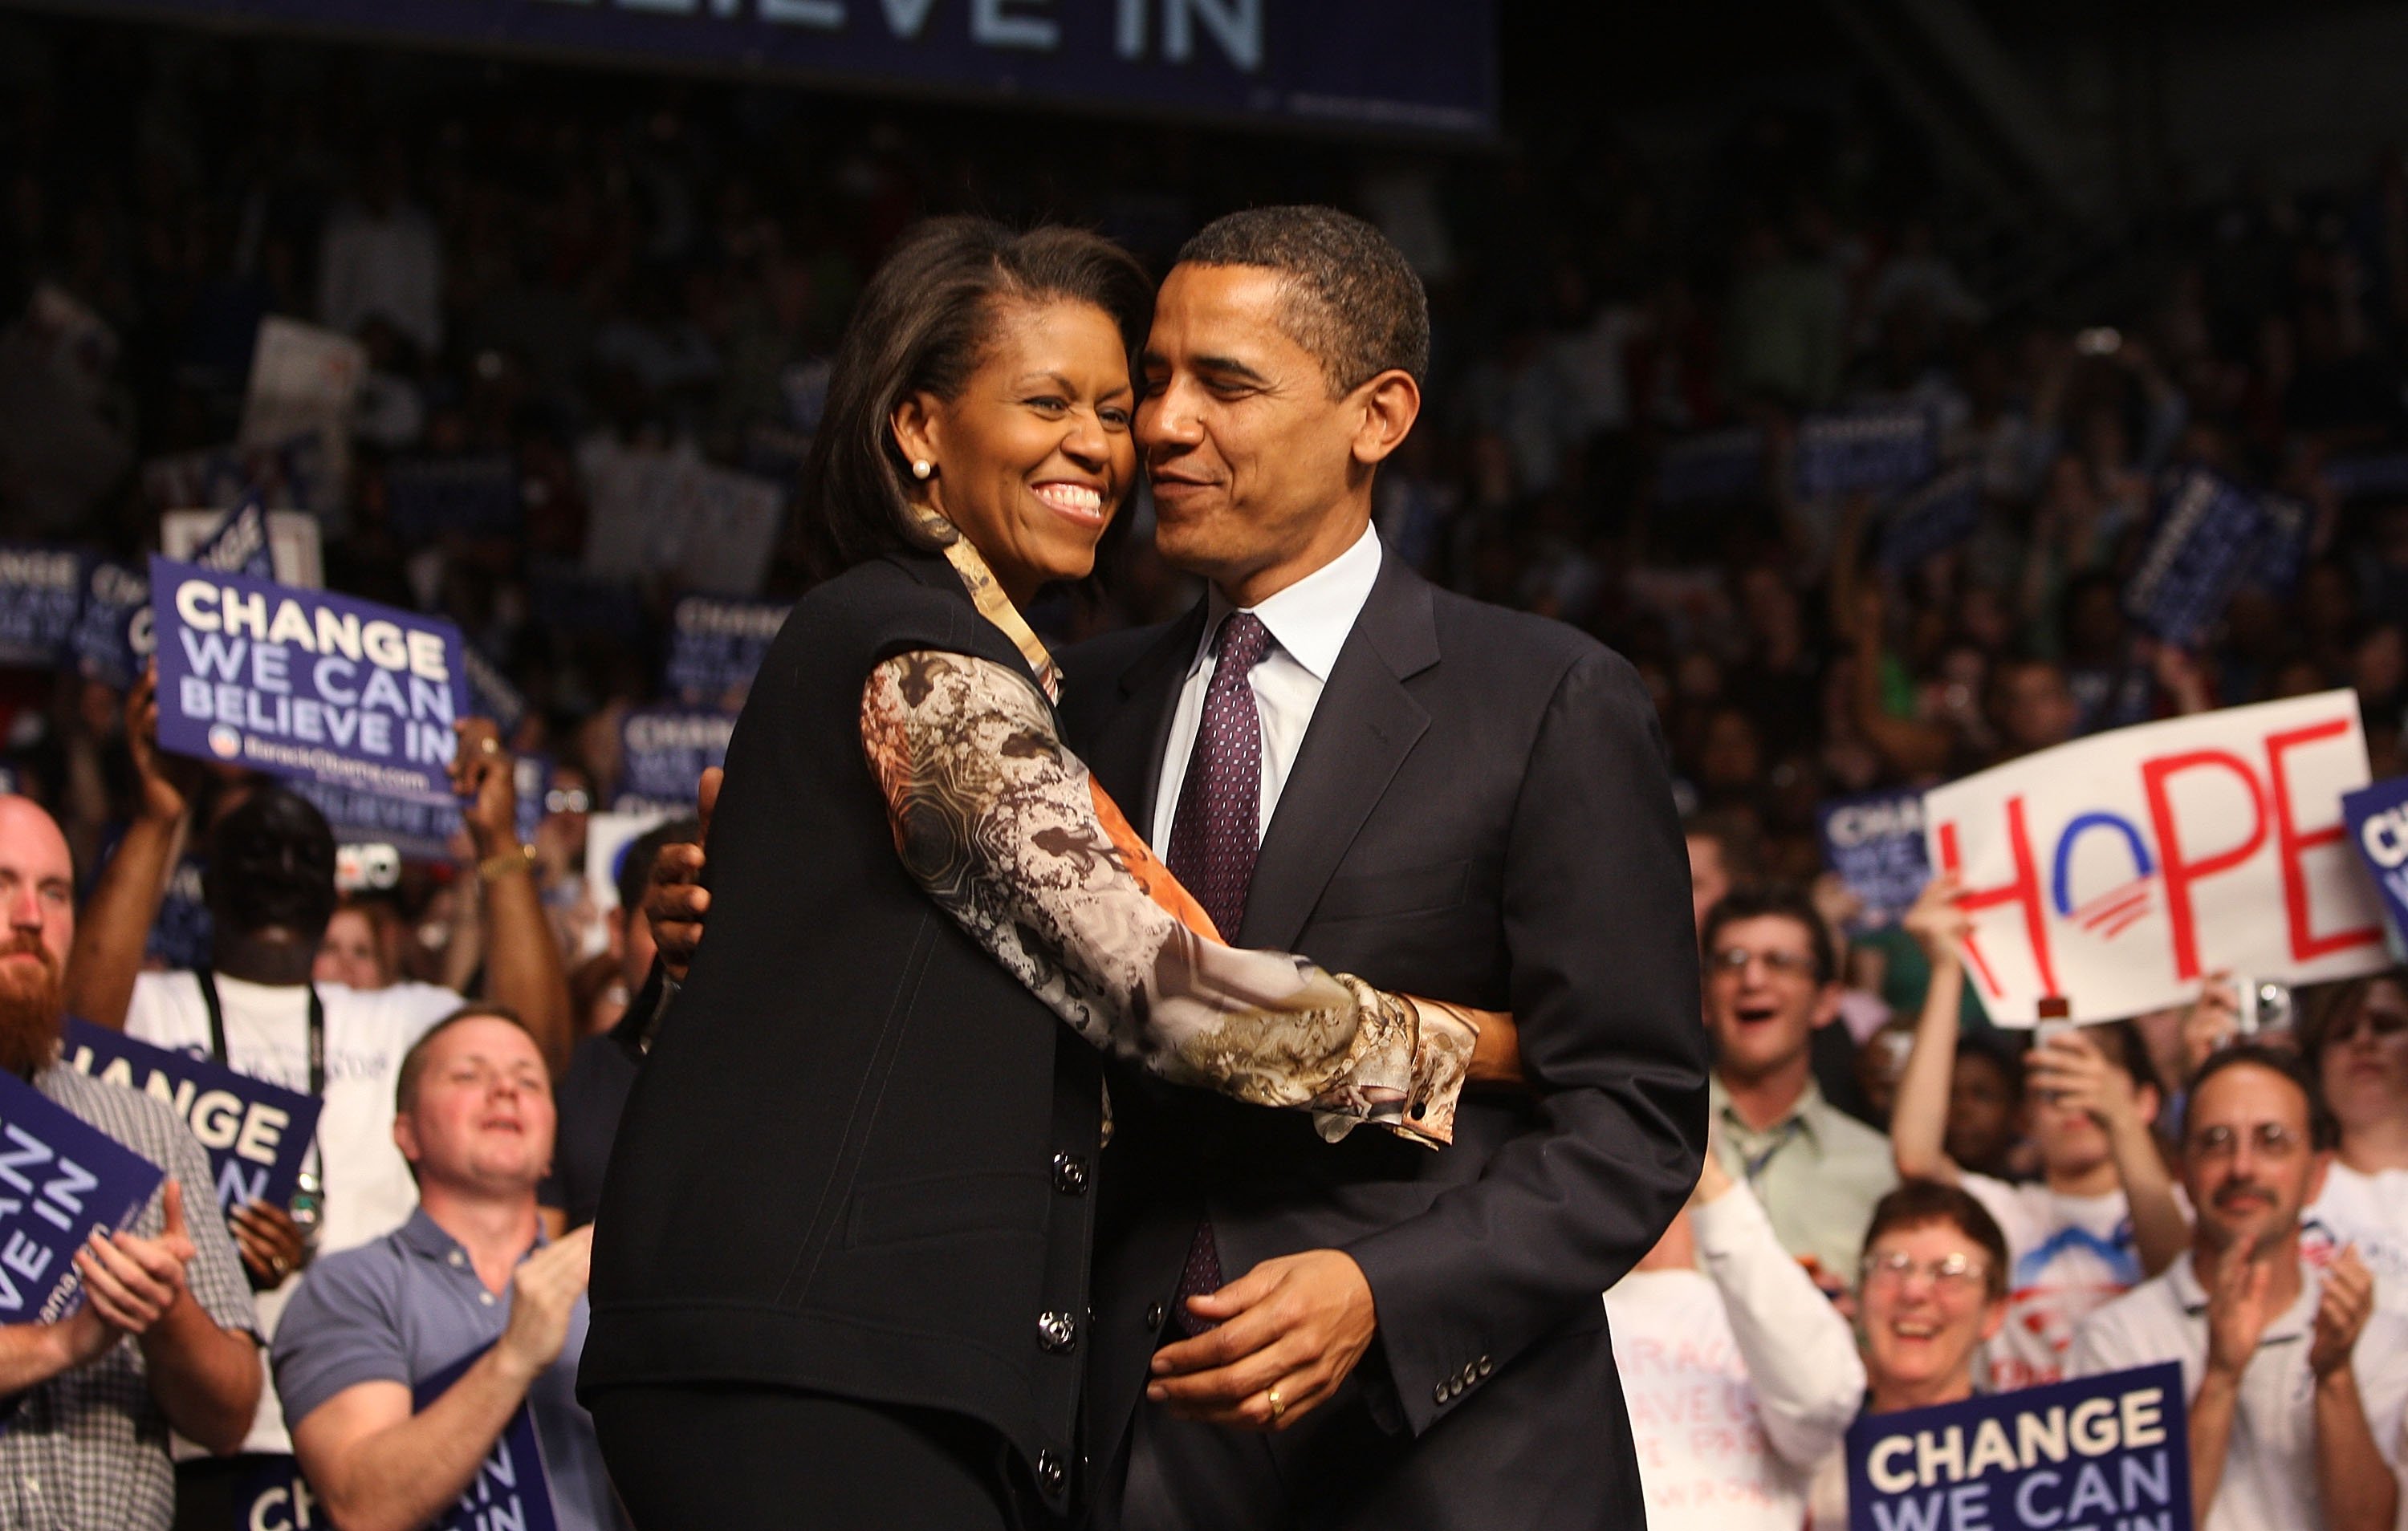 Barack Obama of Illinois and his wife Michelle Obama embrace at a rally April 22, 2008 in Evansville, Indiana. | Photo: GettyImages